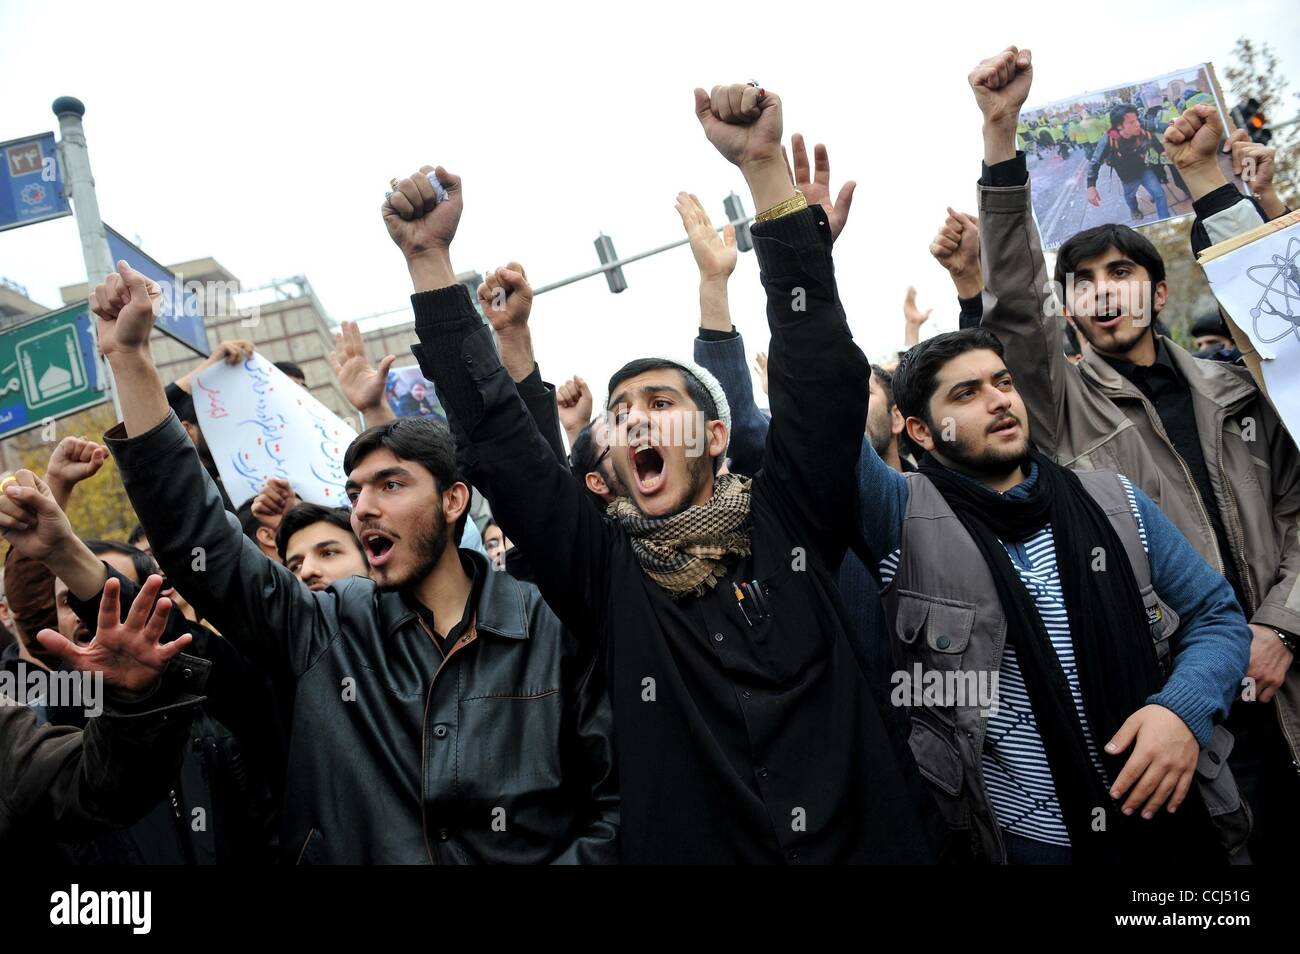 Dec 12, 2010 - Tehran, Iran - Iranian students gathered in front of the British Embassy in Tehran to condemn the assassination of Iranian nuclear scientist Majid Shahriari, who was killed Nov 29 by a car bomb.The protesters accused Britain and U.S government for his assassination, and condemned West Stock Photo